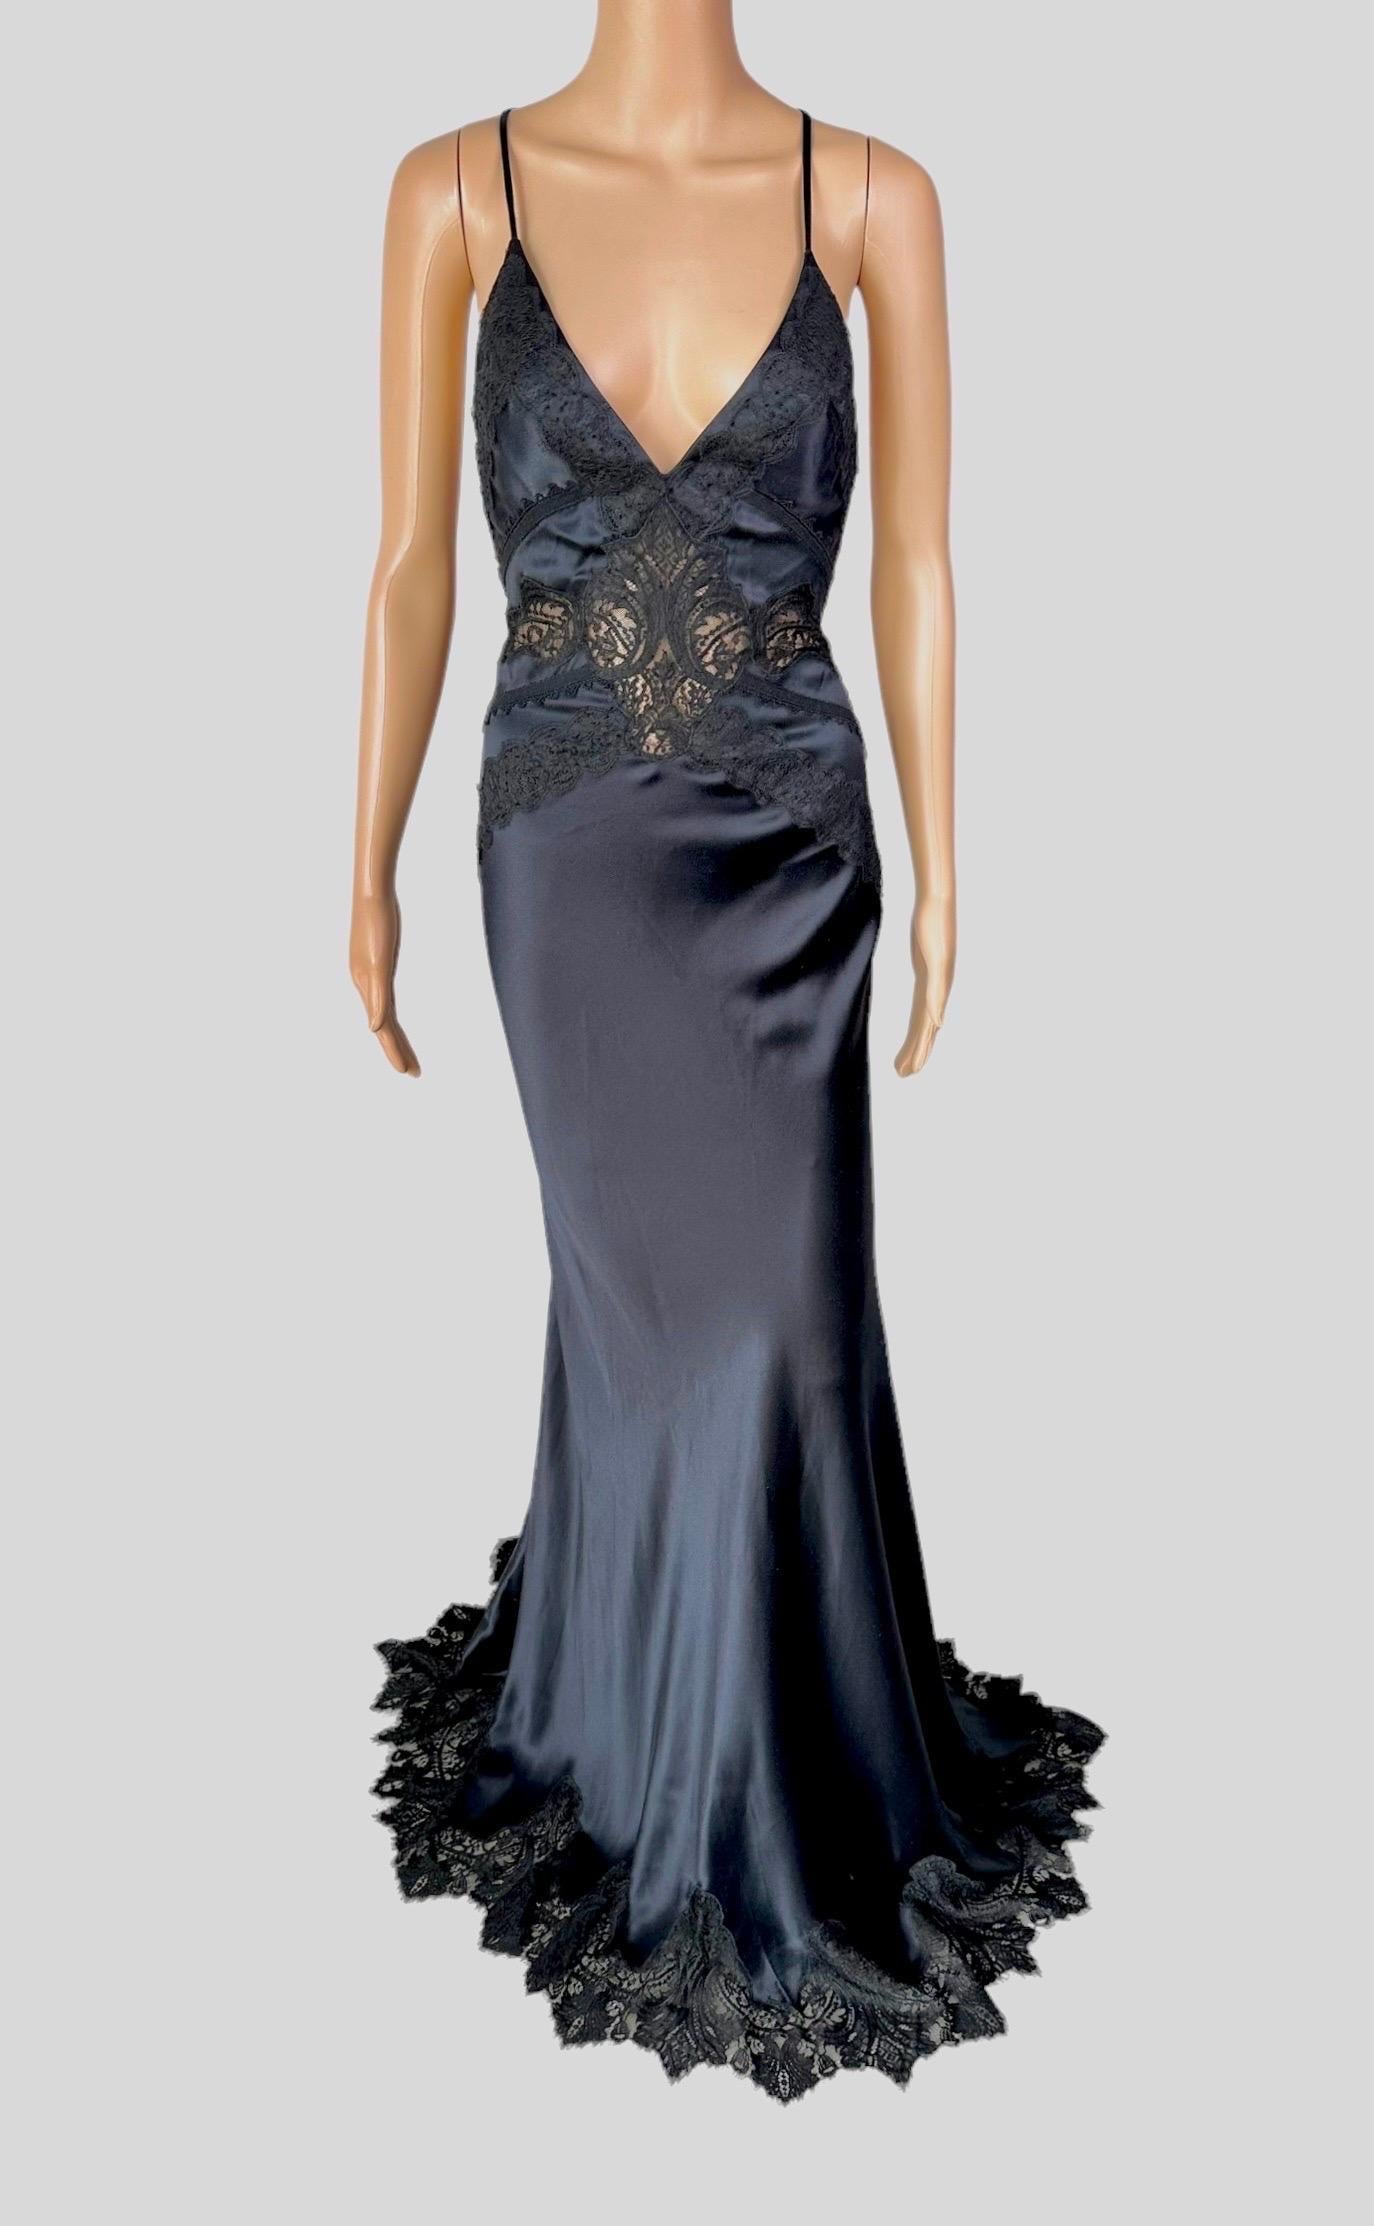 Versace c.2006 Plunging Neckline Sheer Lace Panels Backless Evening Dress Gown  1